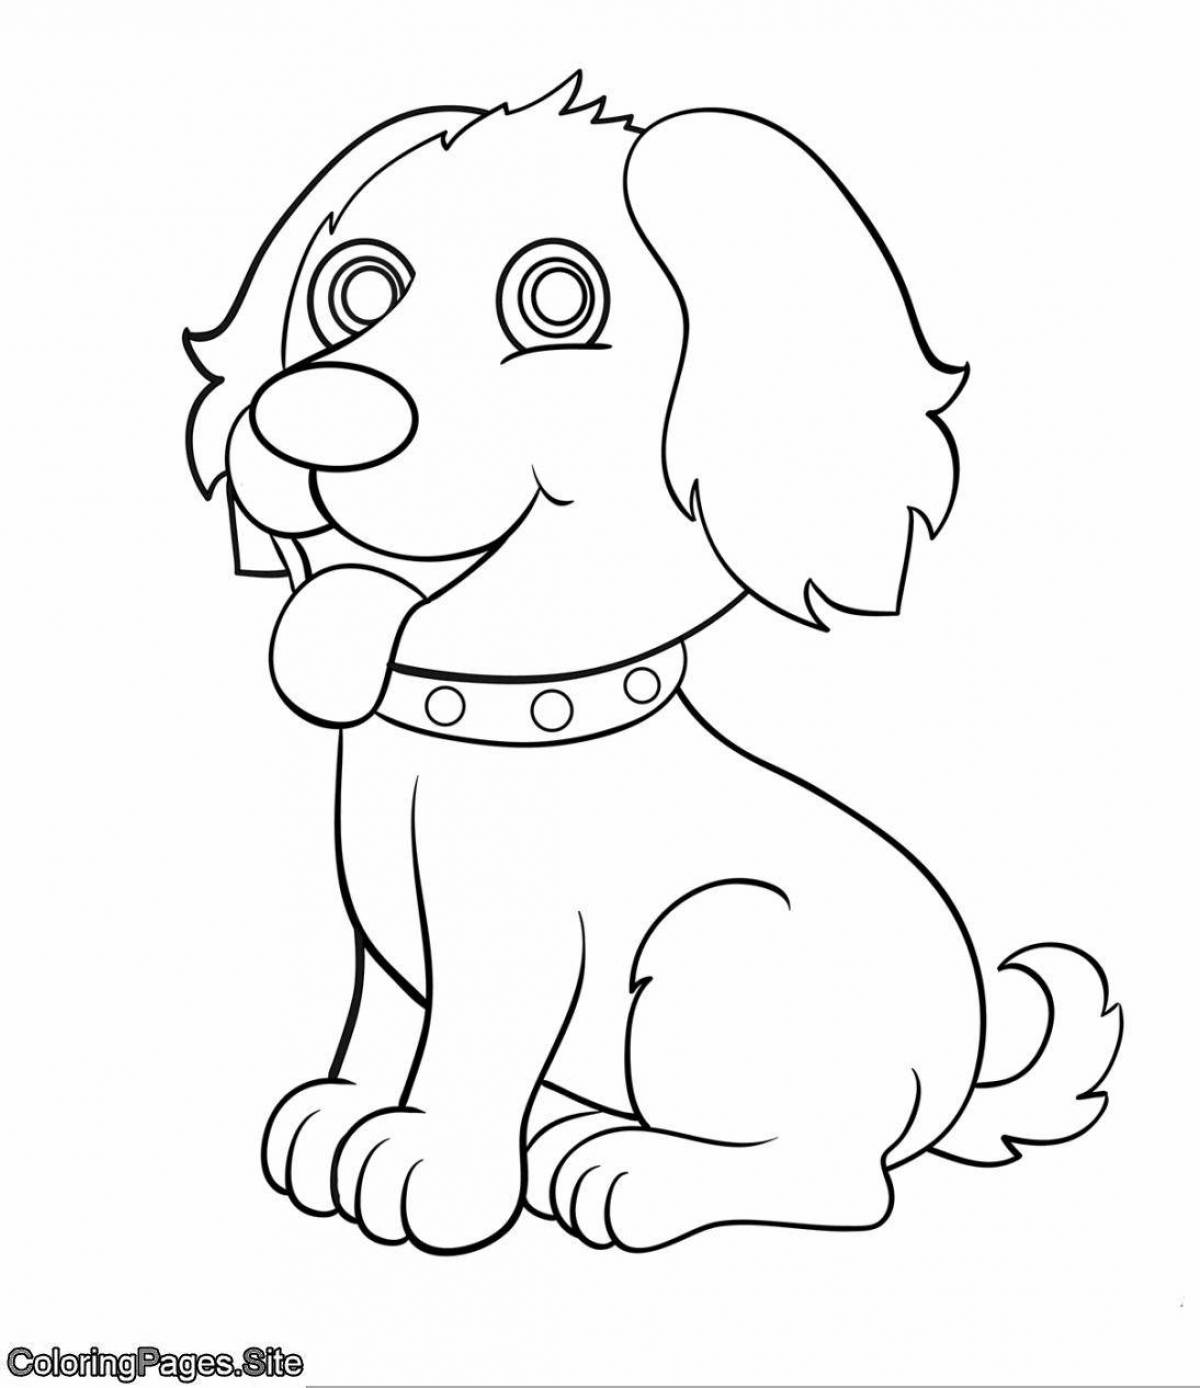 Snuggly coloring page puppy drawing